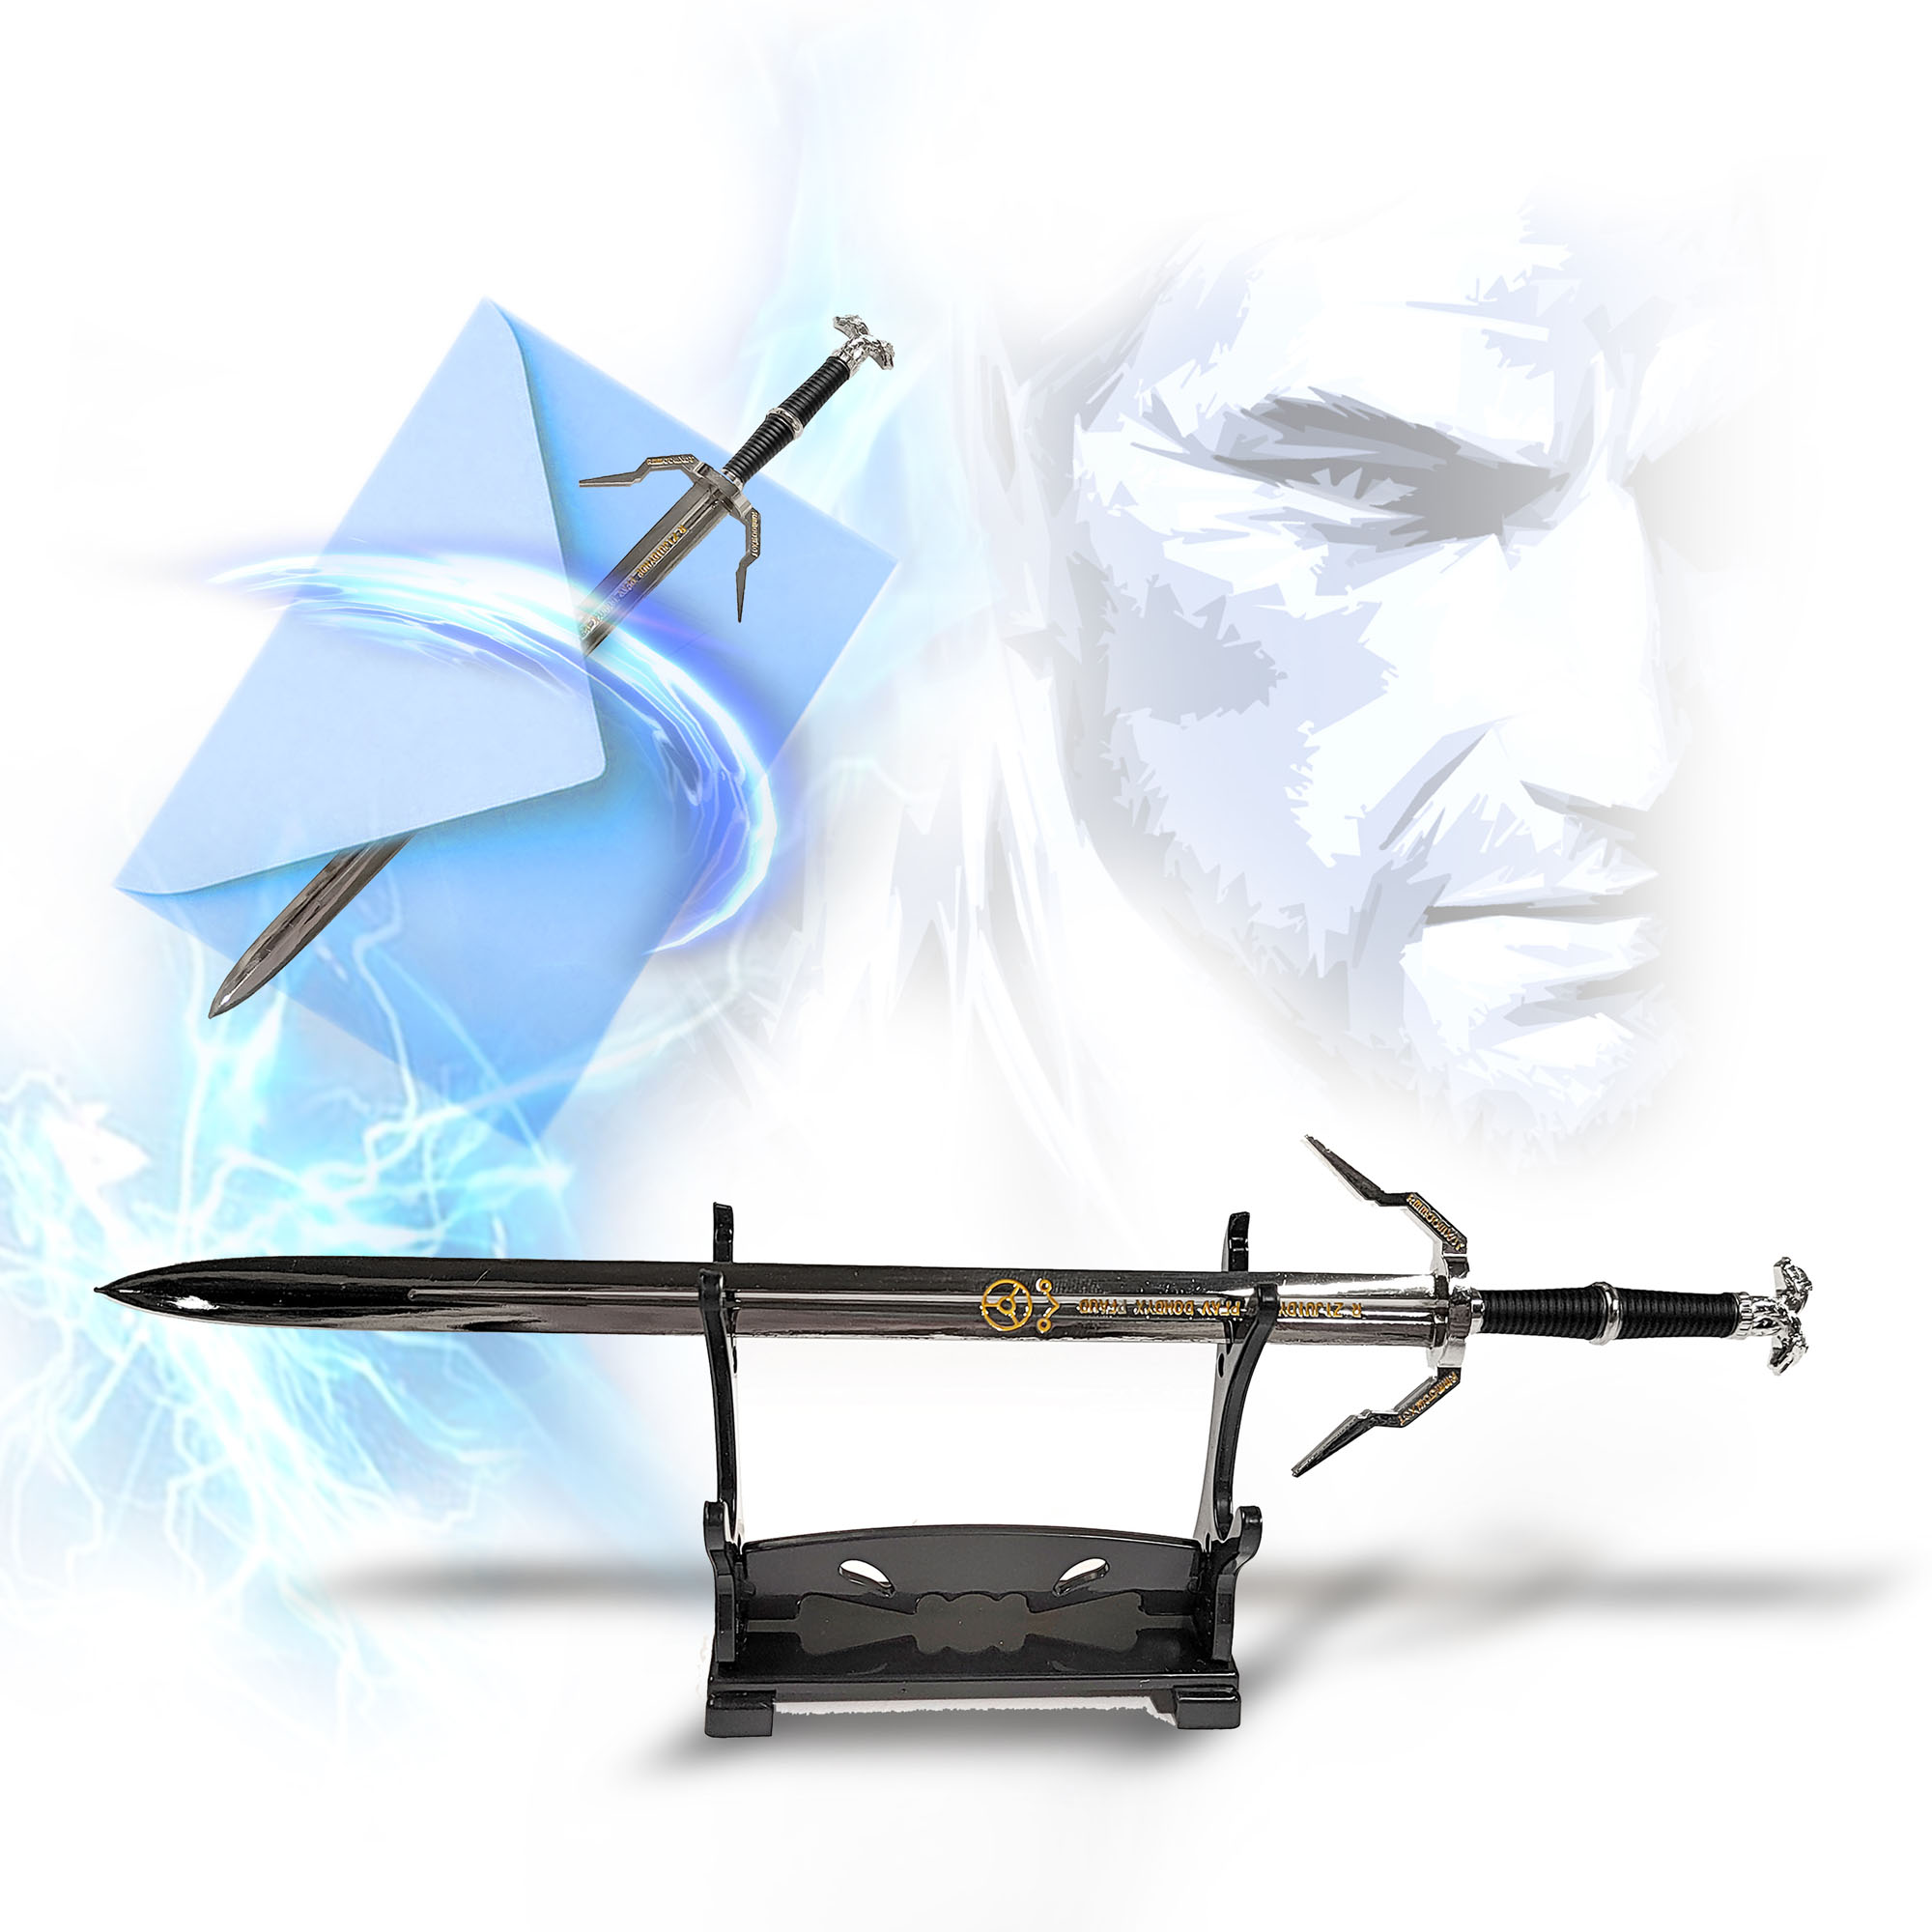 The Witcher - Geralt of Rivia Silver Sword, Letter Opener Sword with Stand